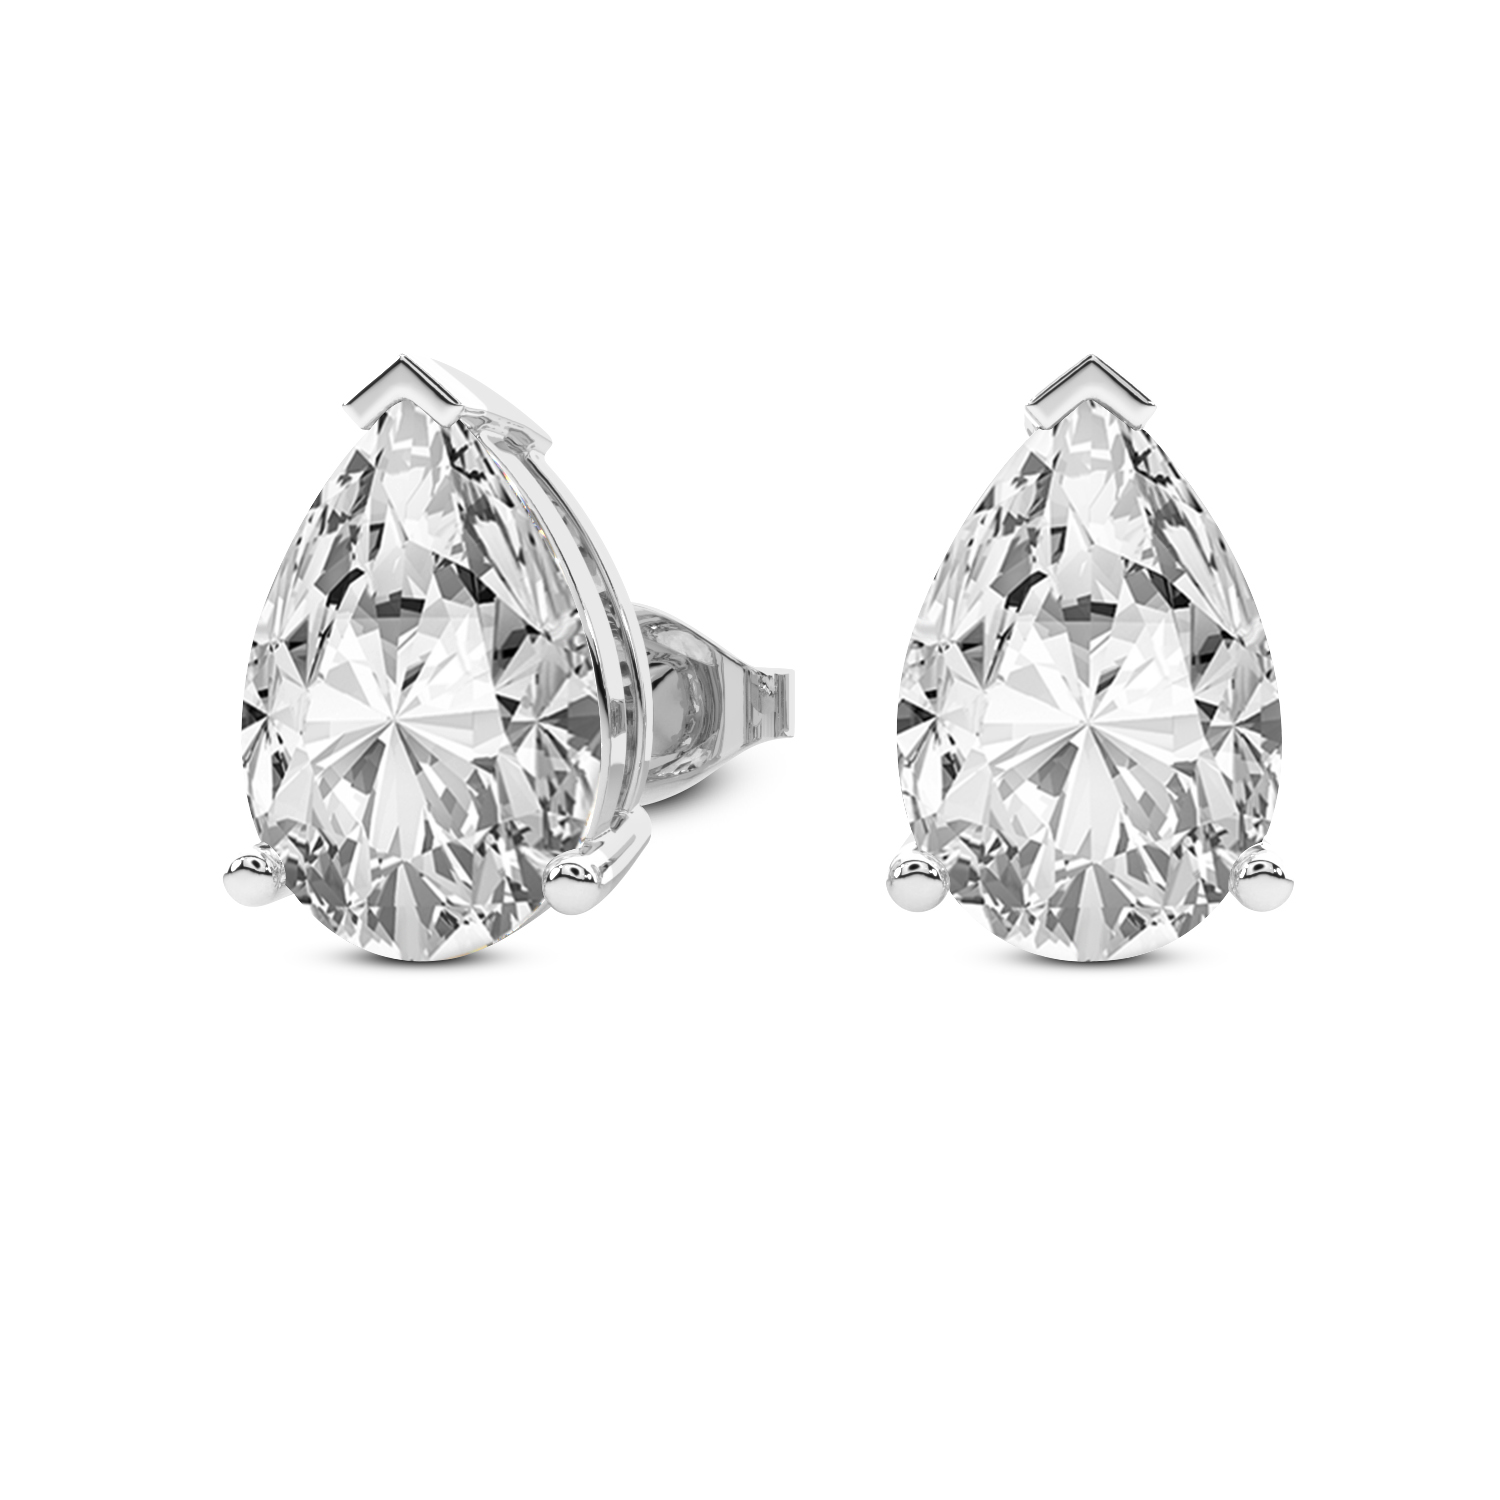 3 Prong Pear Lab Diamond Stud Earrings white gold earring, small right view